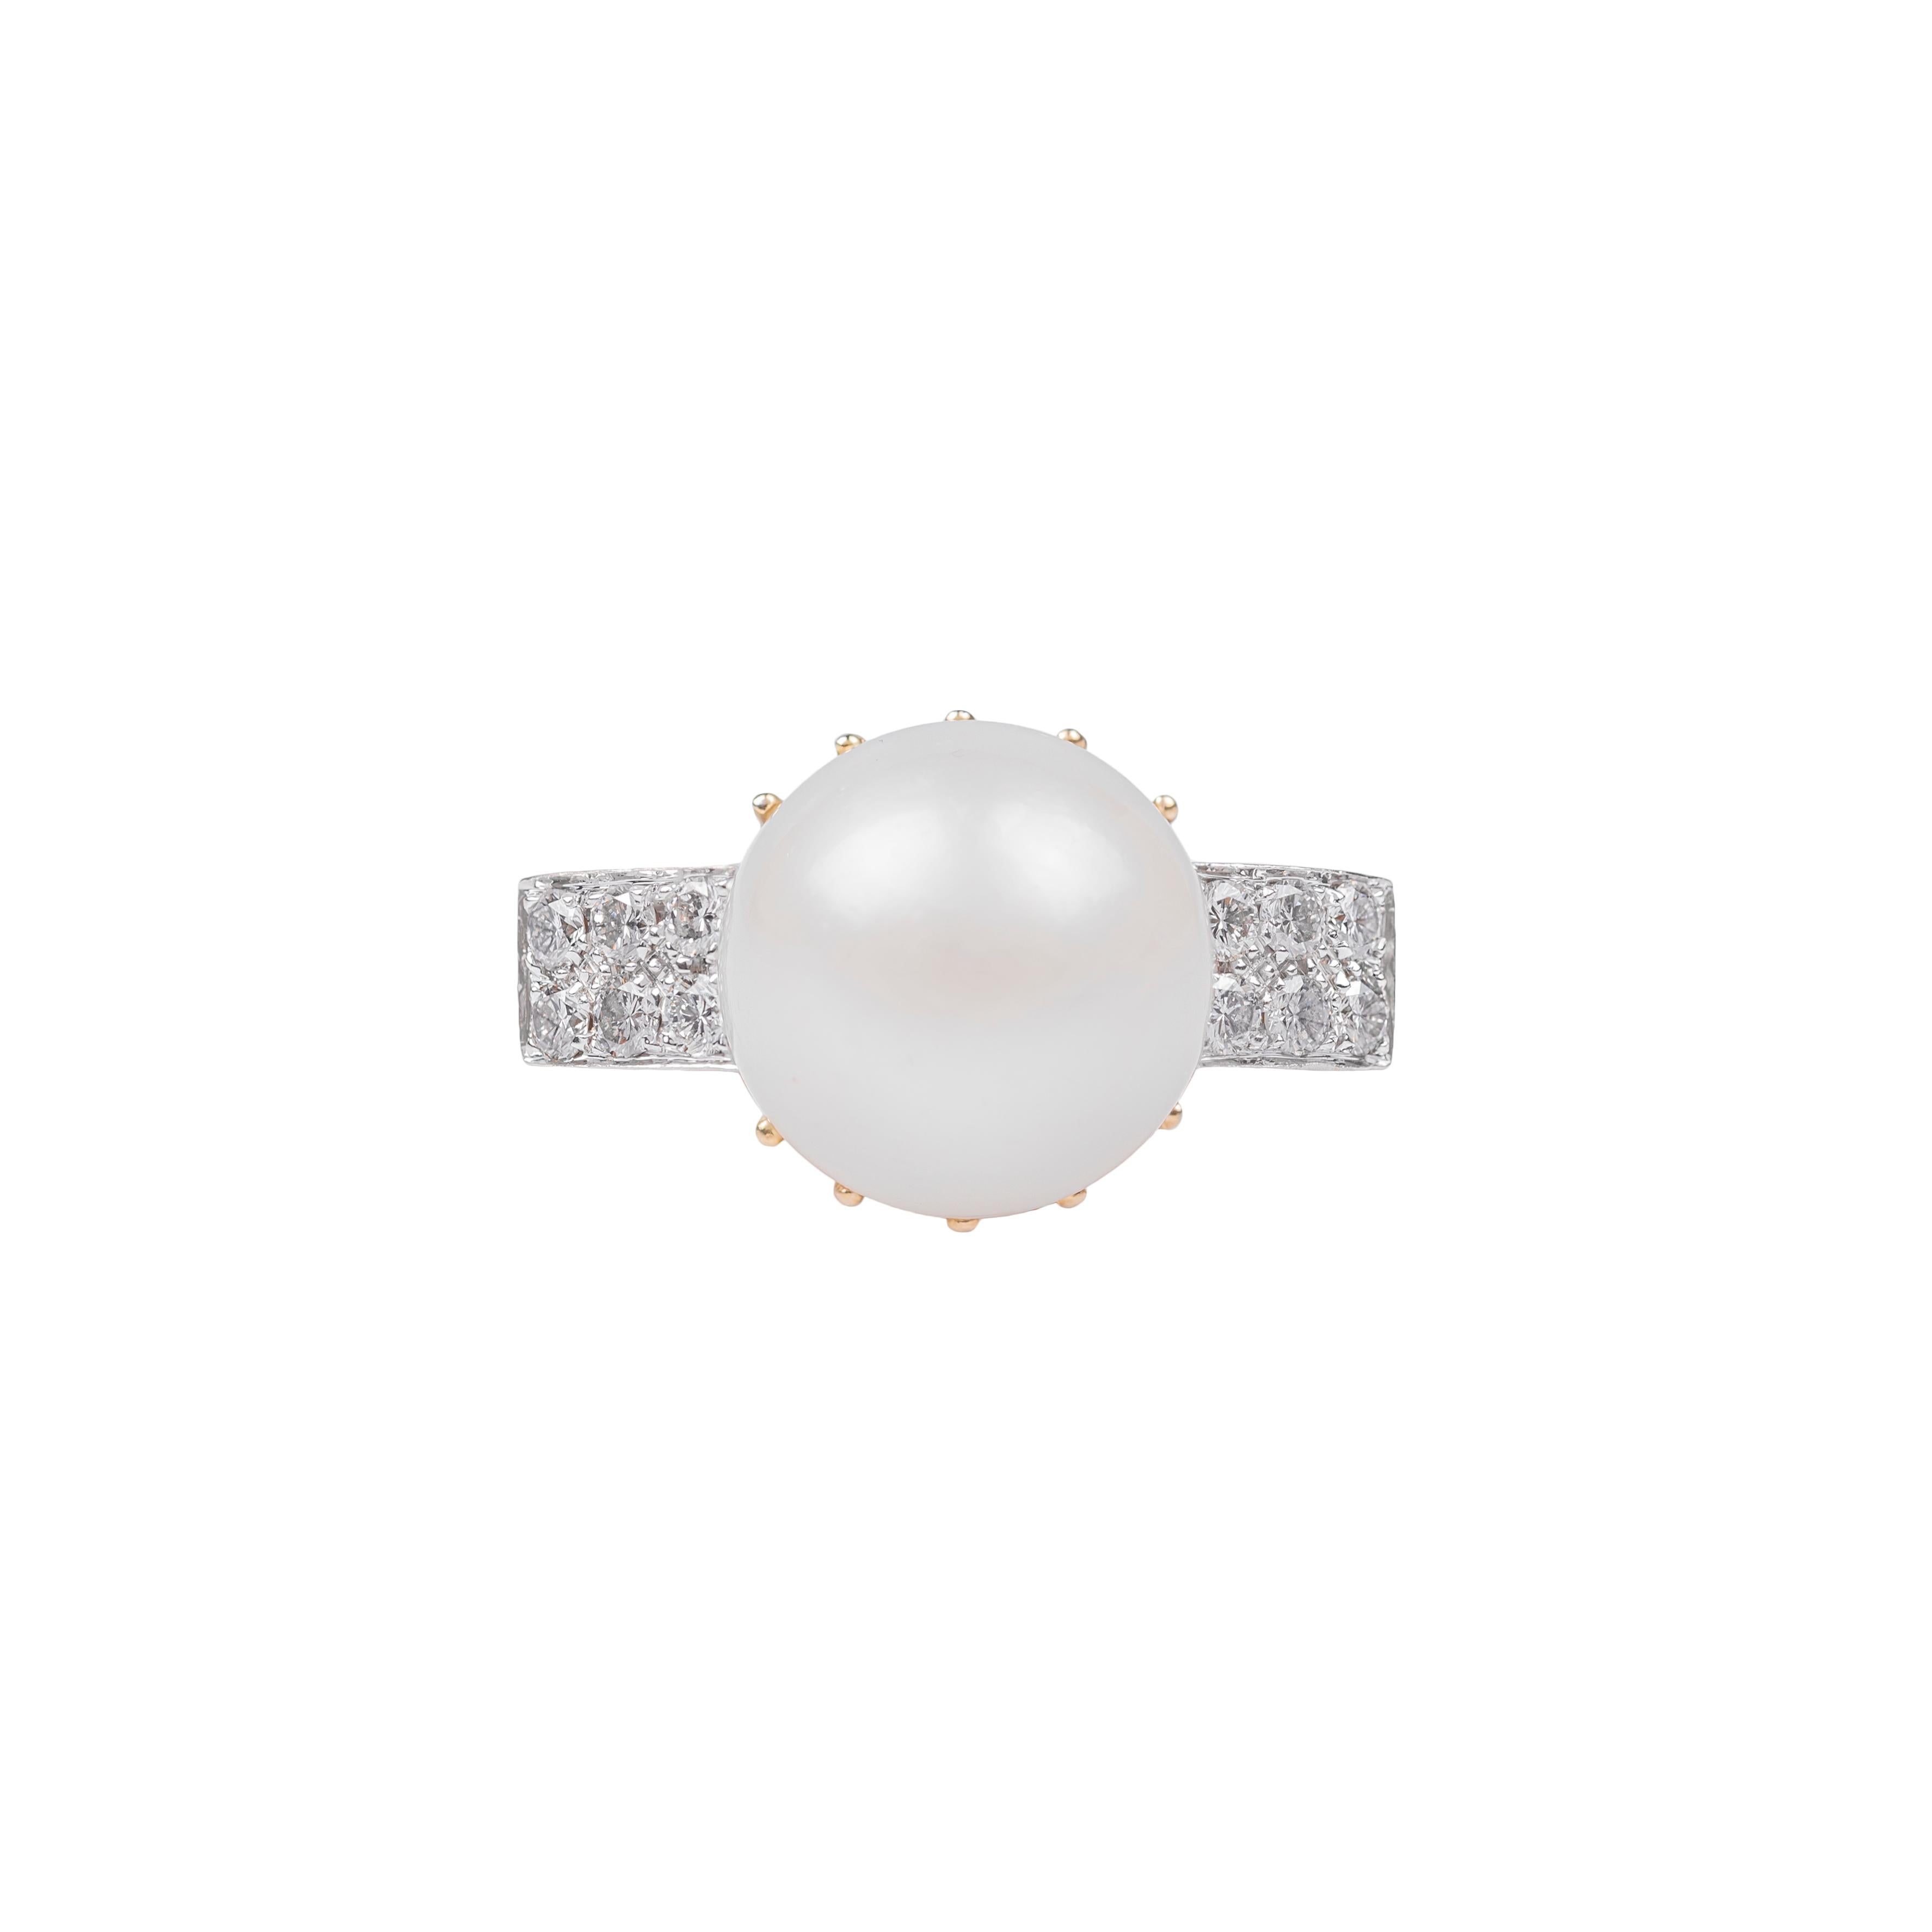 This ring was made in Italy by Chantecler Capri.
The frame is 18k yellow gold and it feature a pearl in the centre supported by ten claws, and six brilliant cut diamonds on each side.
Chantecler brand is stamped both inside and outside the